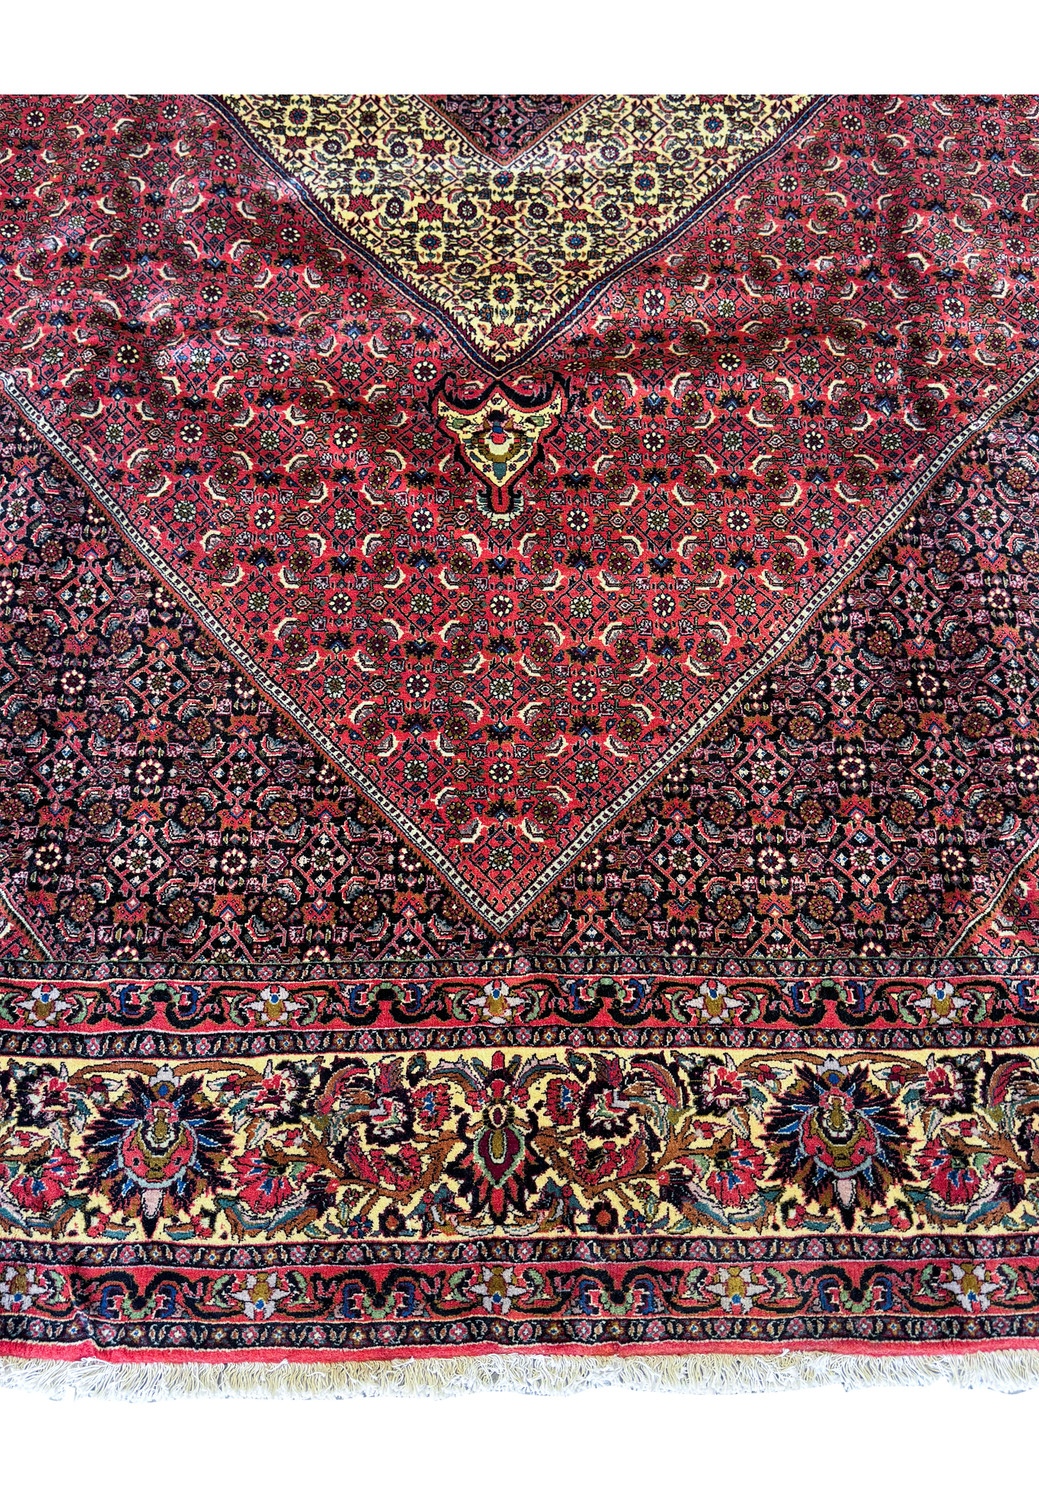 Overhead close-up of a section of the Persian Bijar Rug, with a focus on the detailed floral and geometric designs